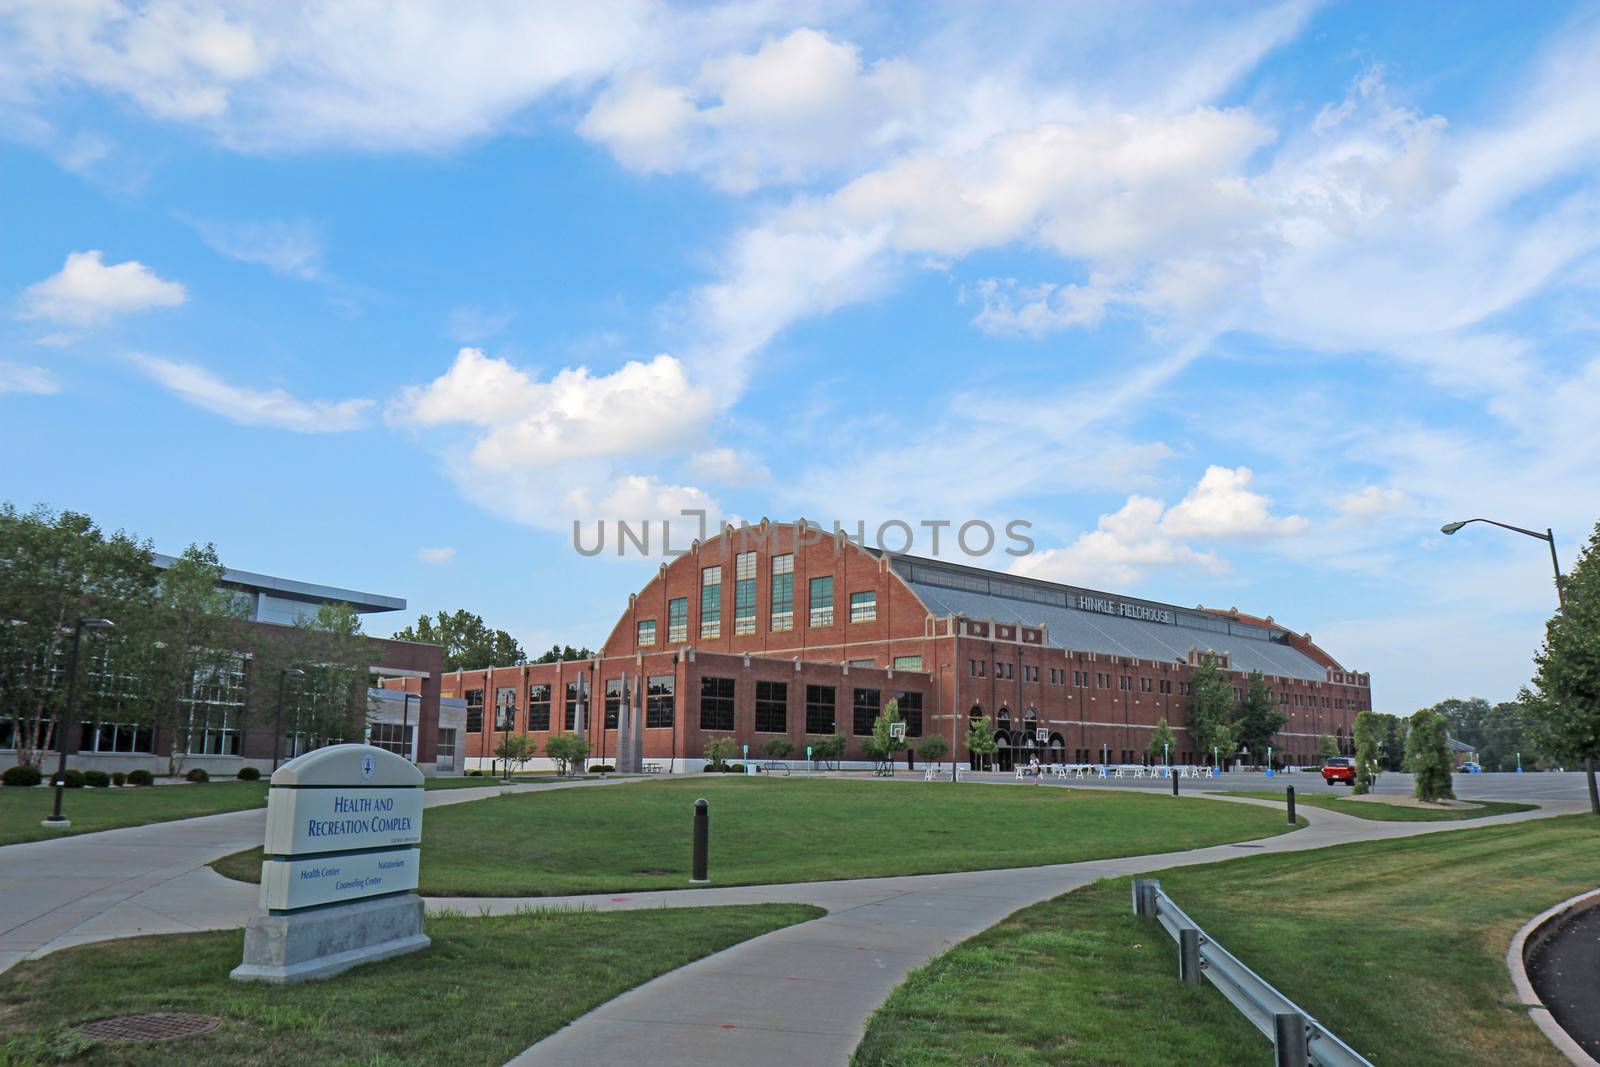 Hinkle Fieldhouse on the Butler University campus by sgoodwin4813